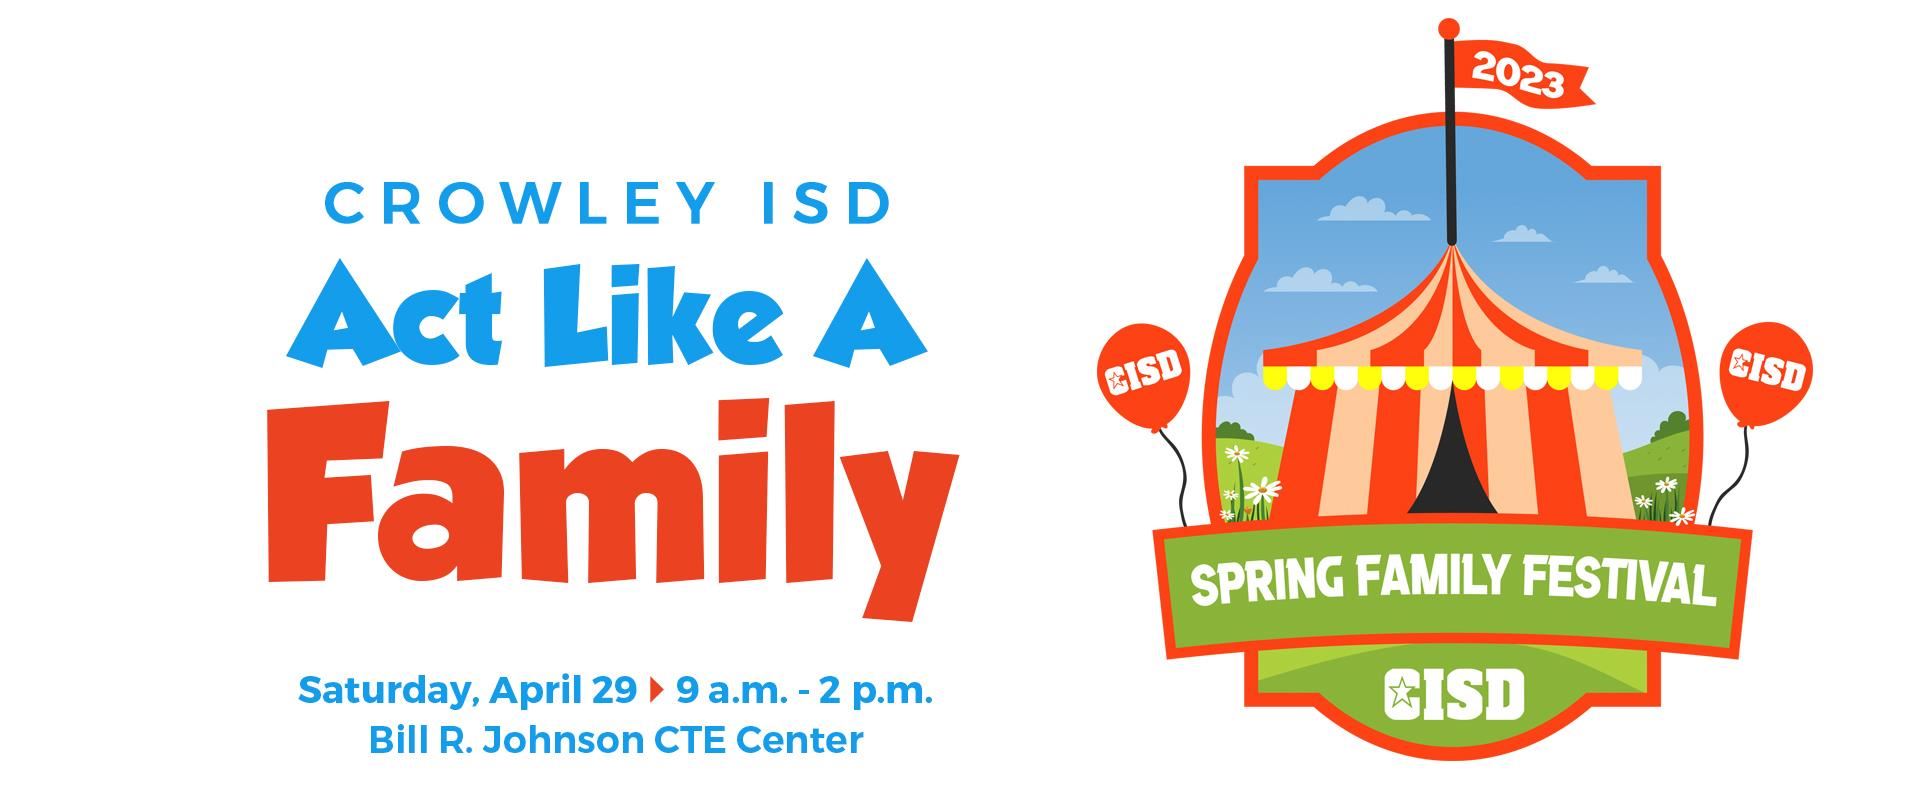 Act Like A Family - Spring Family Festival logo and information